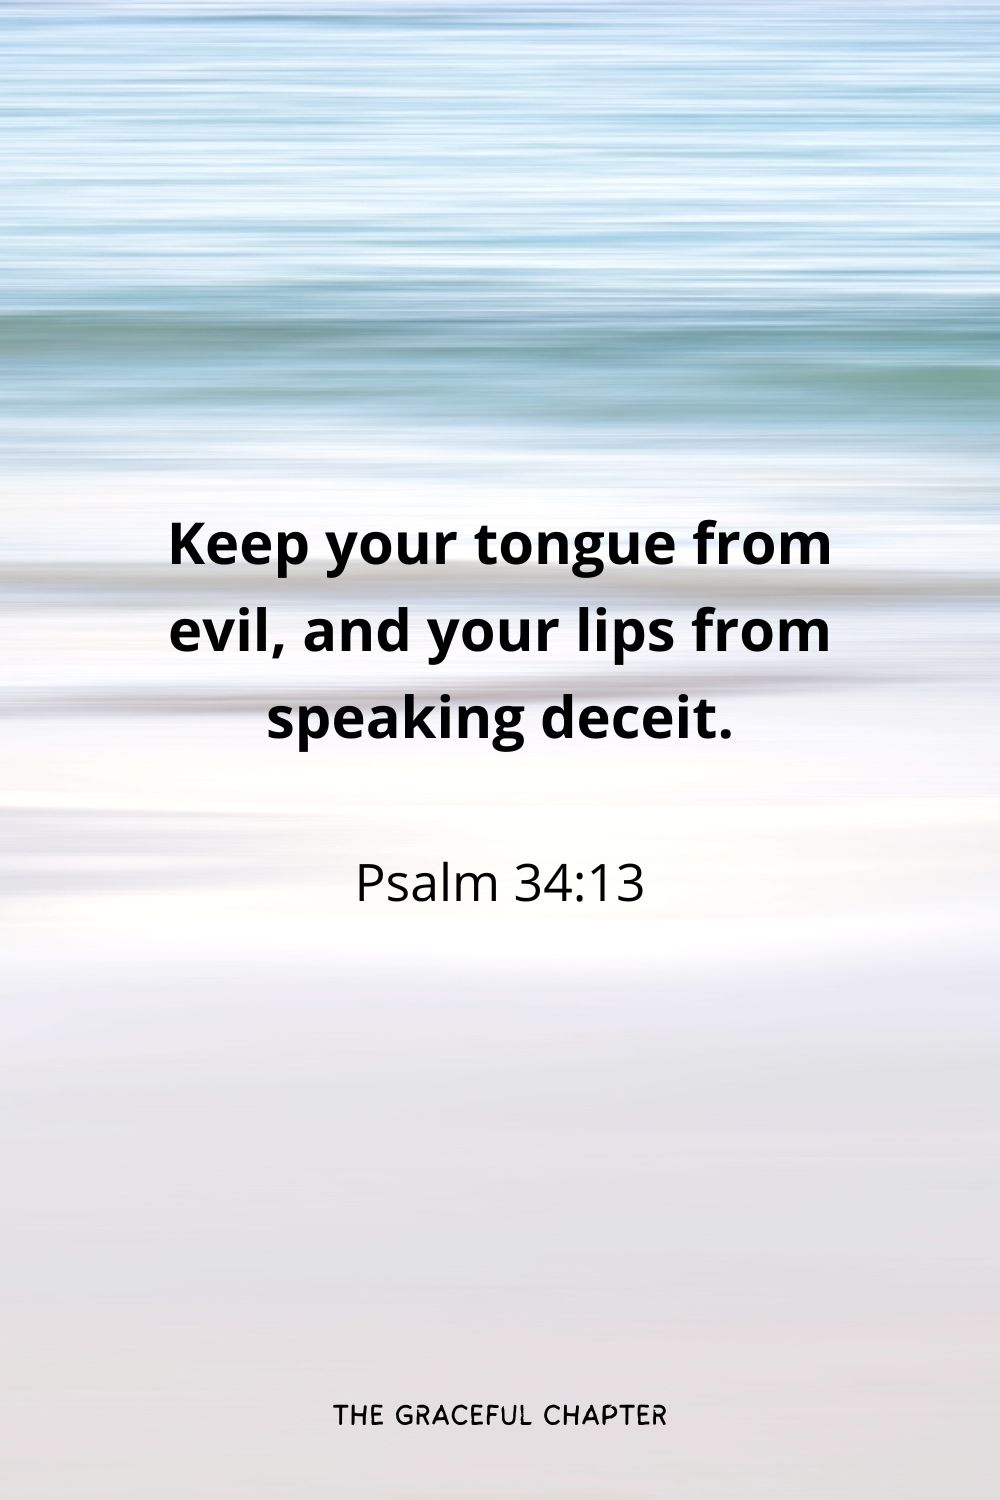 Keep your tongue from evil, and your lips from speaking deceit.